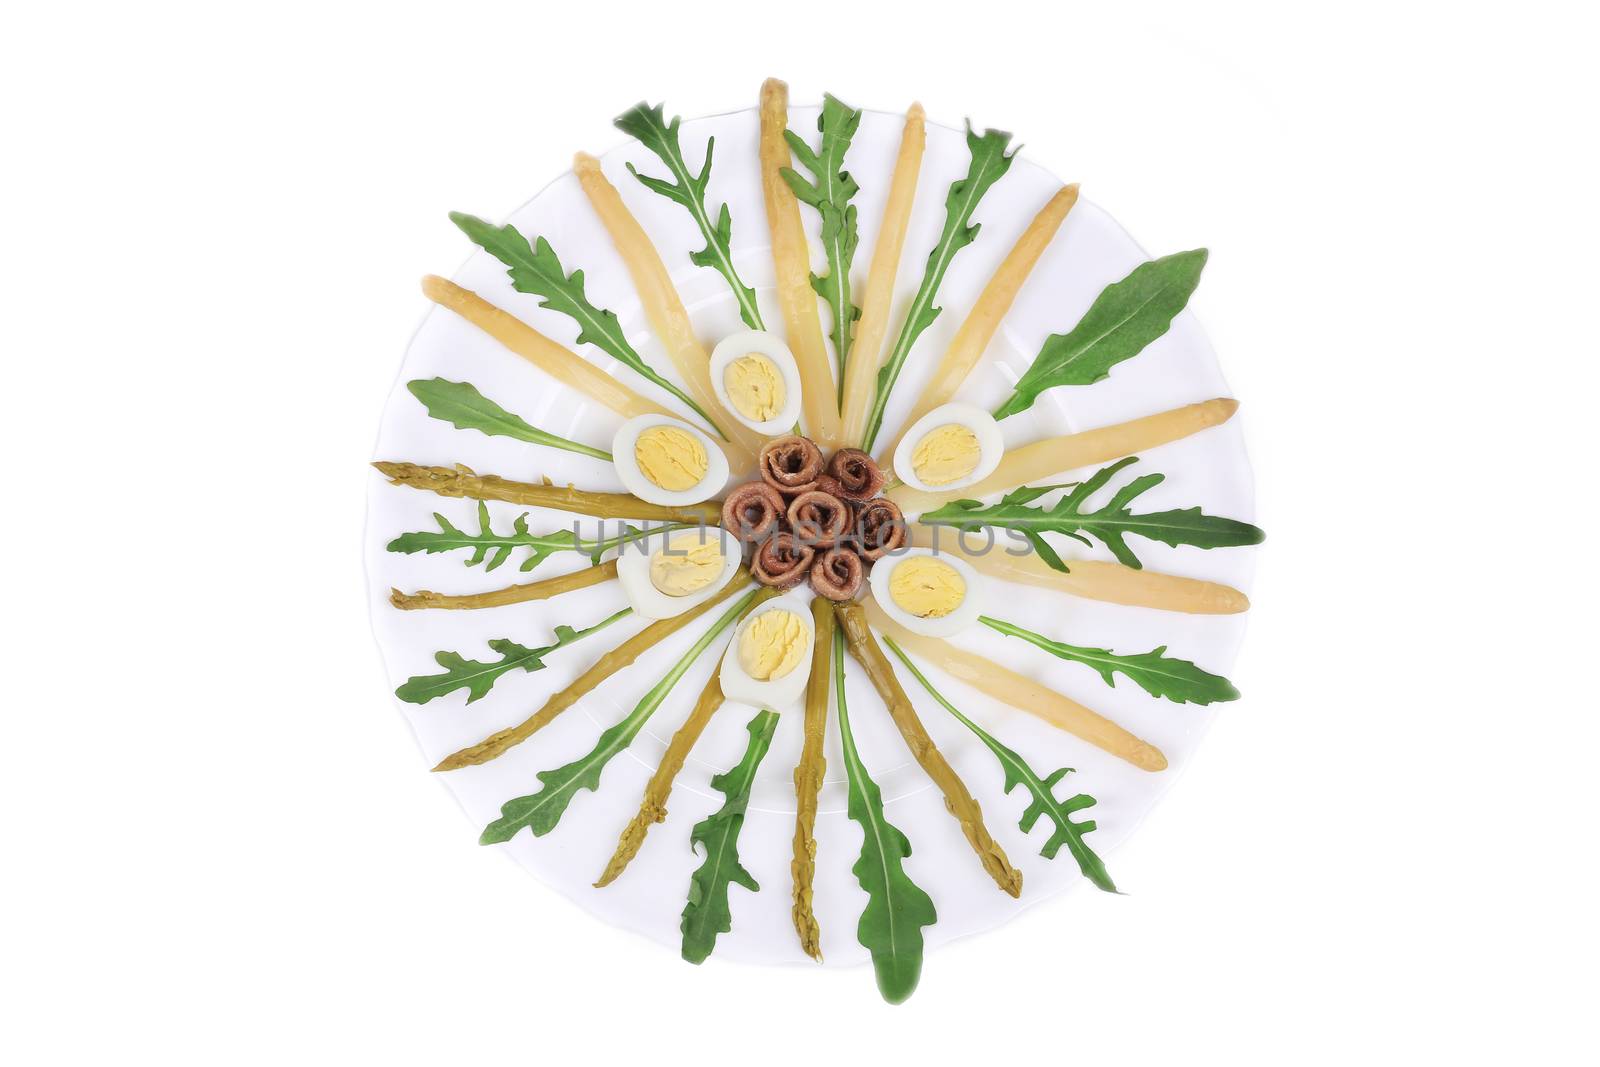 Asparagus salad with anchovies Isolated on a white background.